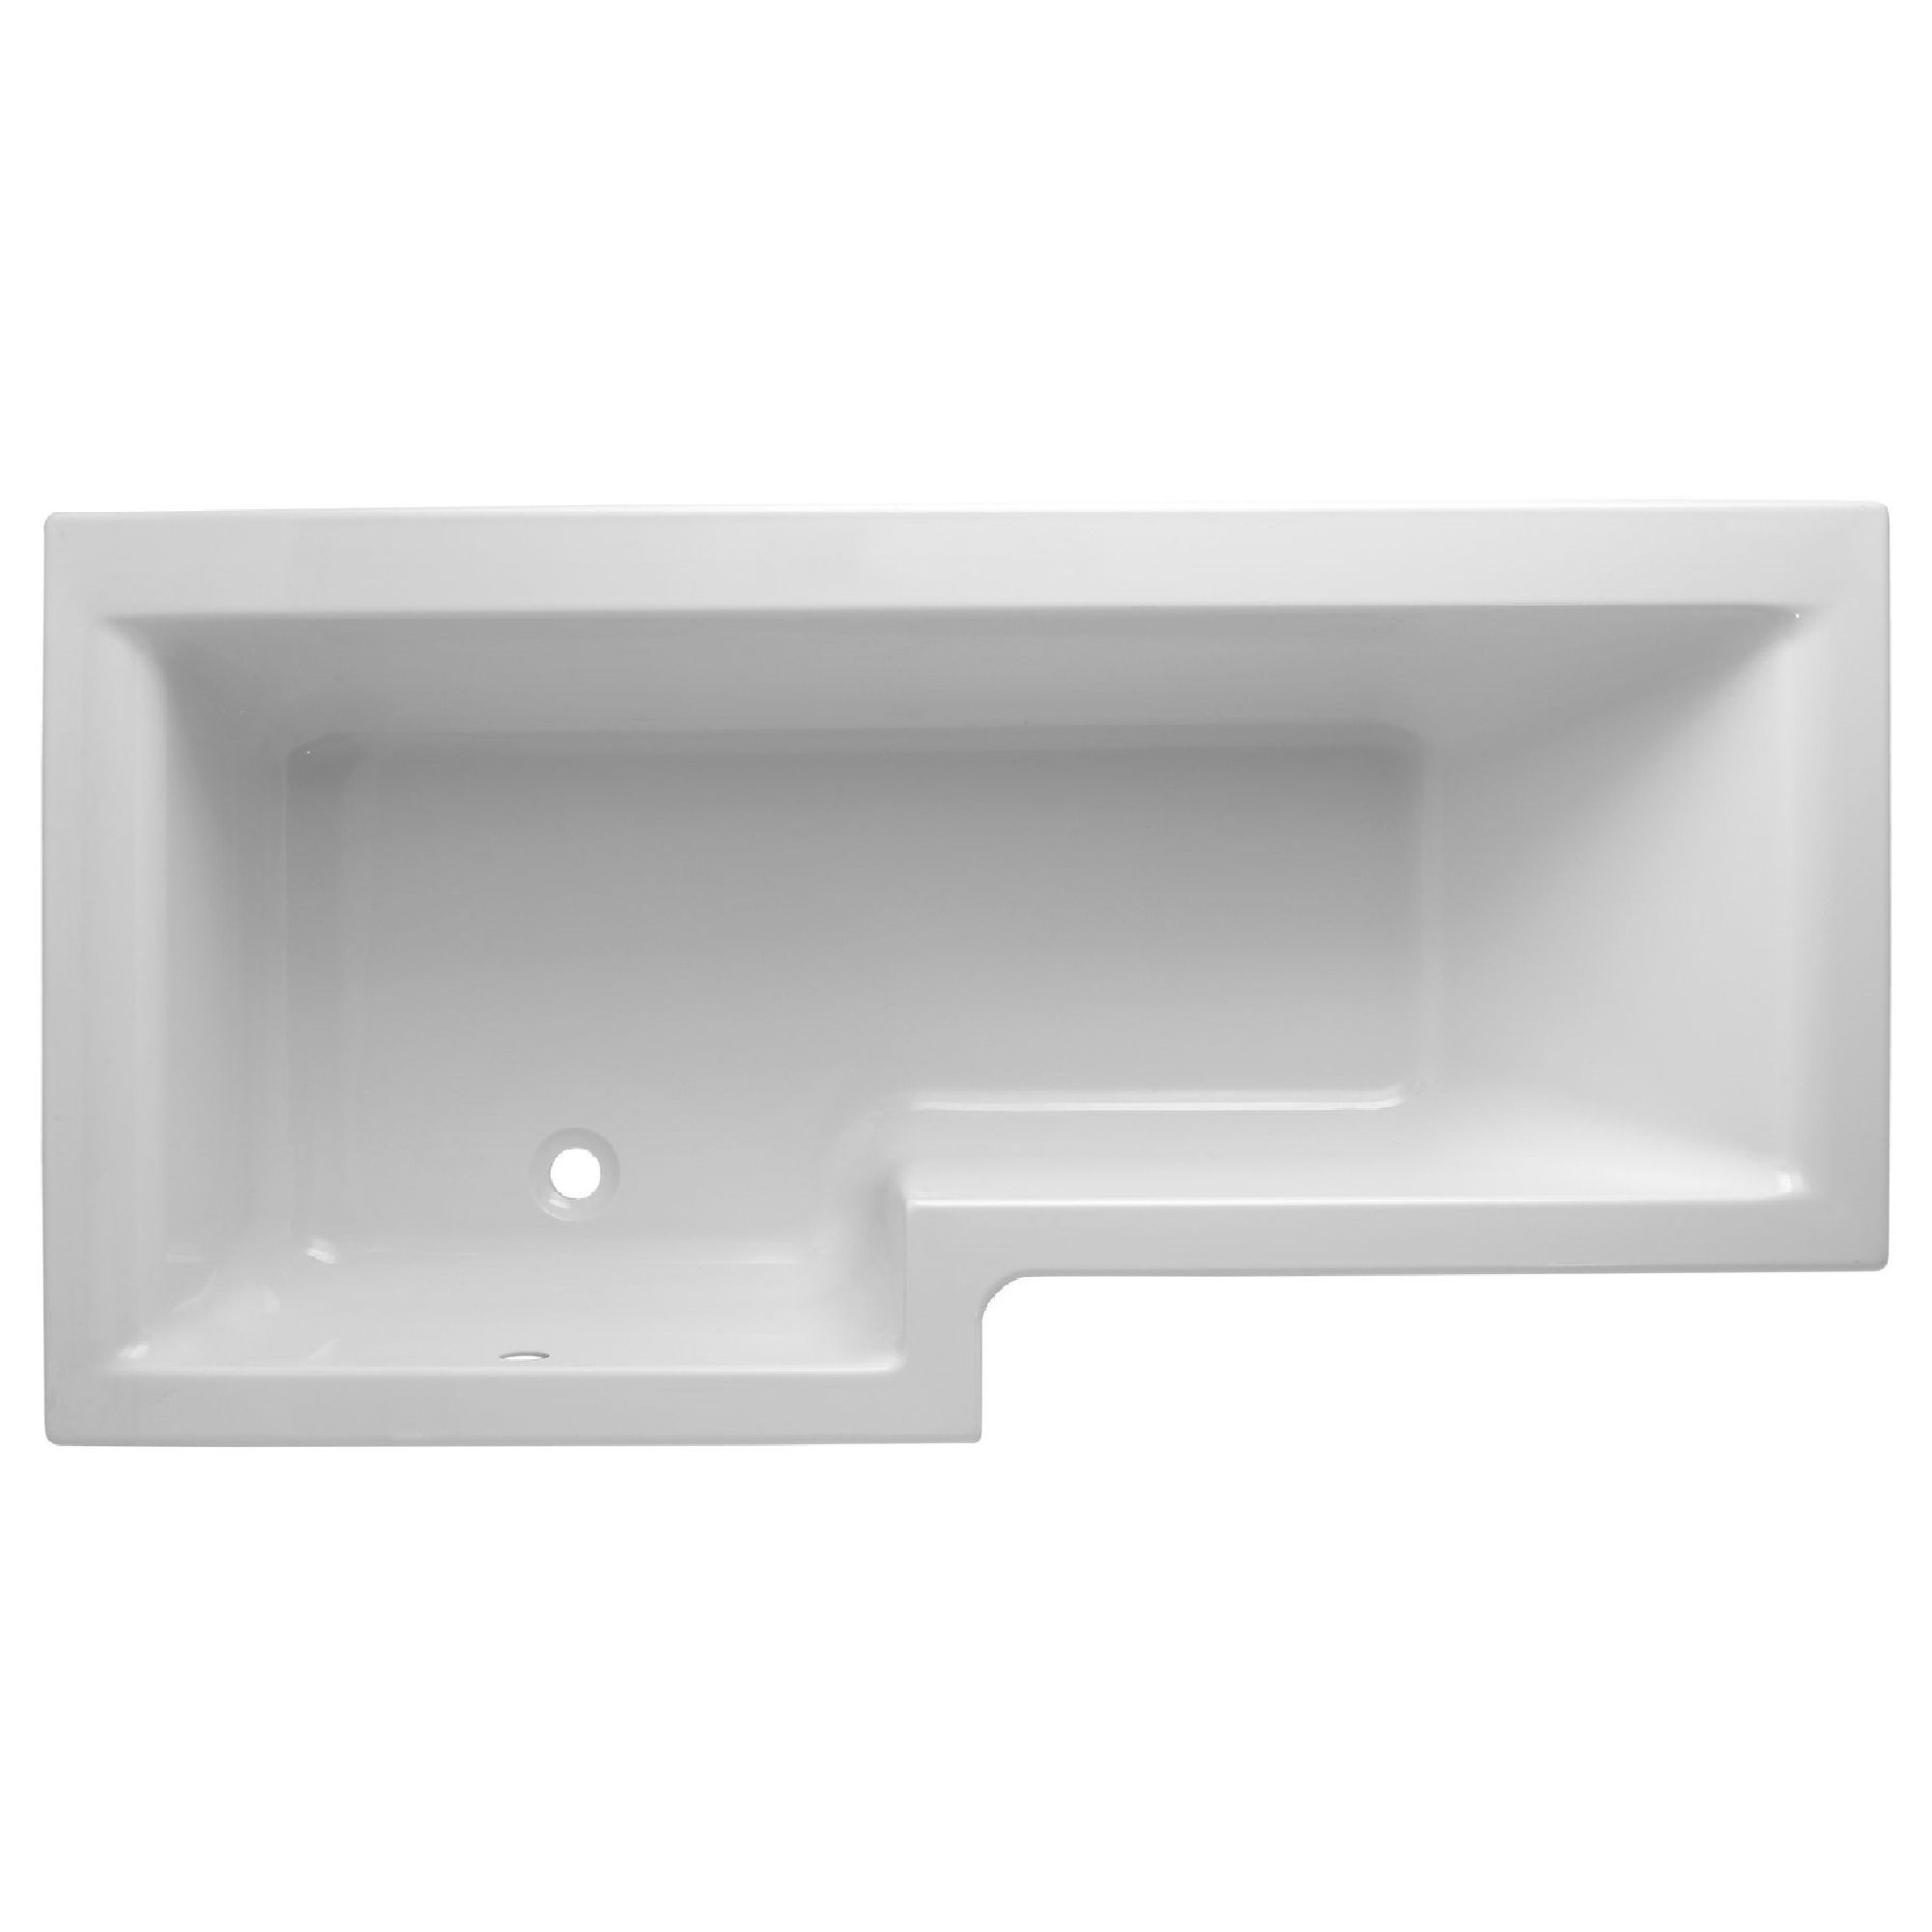 Cooke & Lewis Adelphi White Left-handed Shower Bath, panel, screen & air spa set with 12 jets